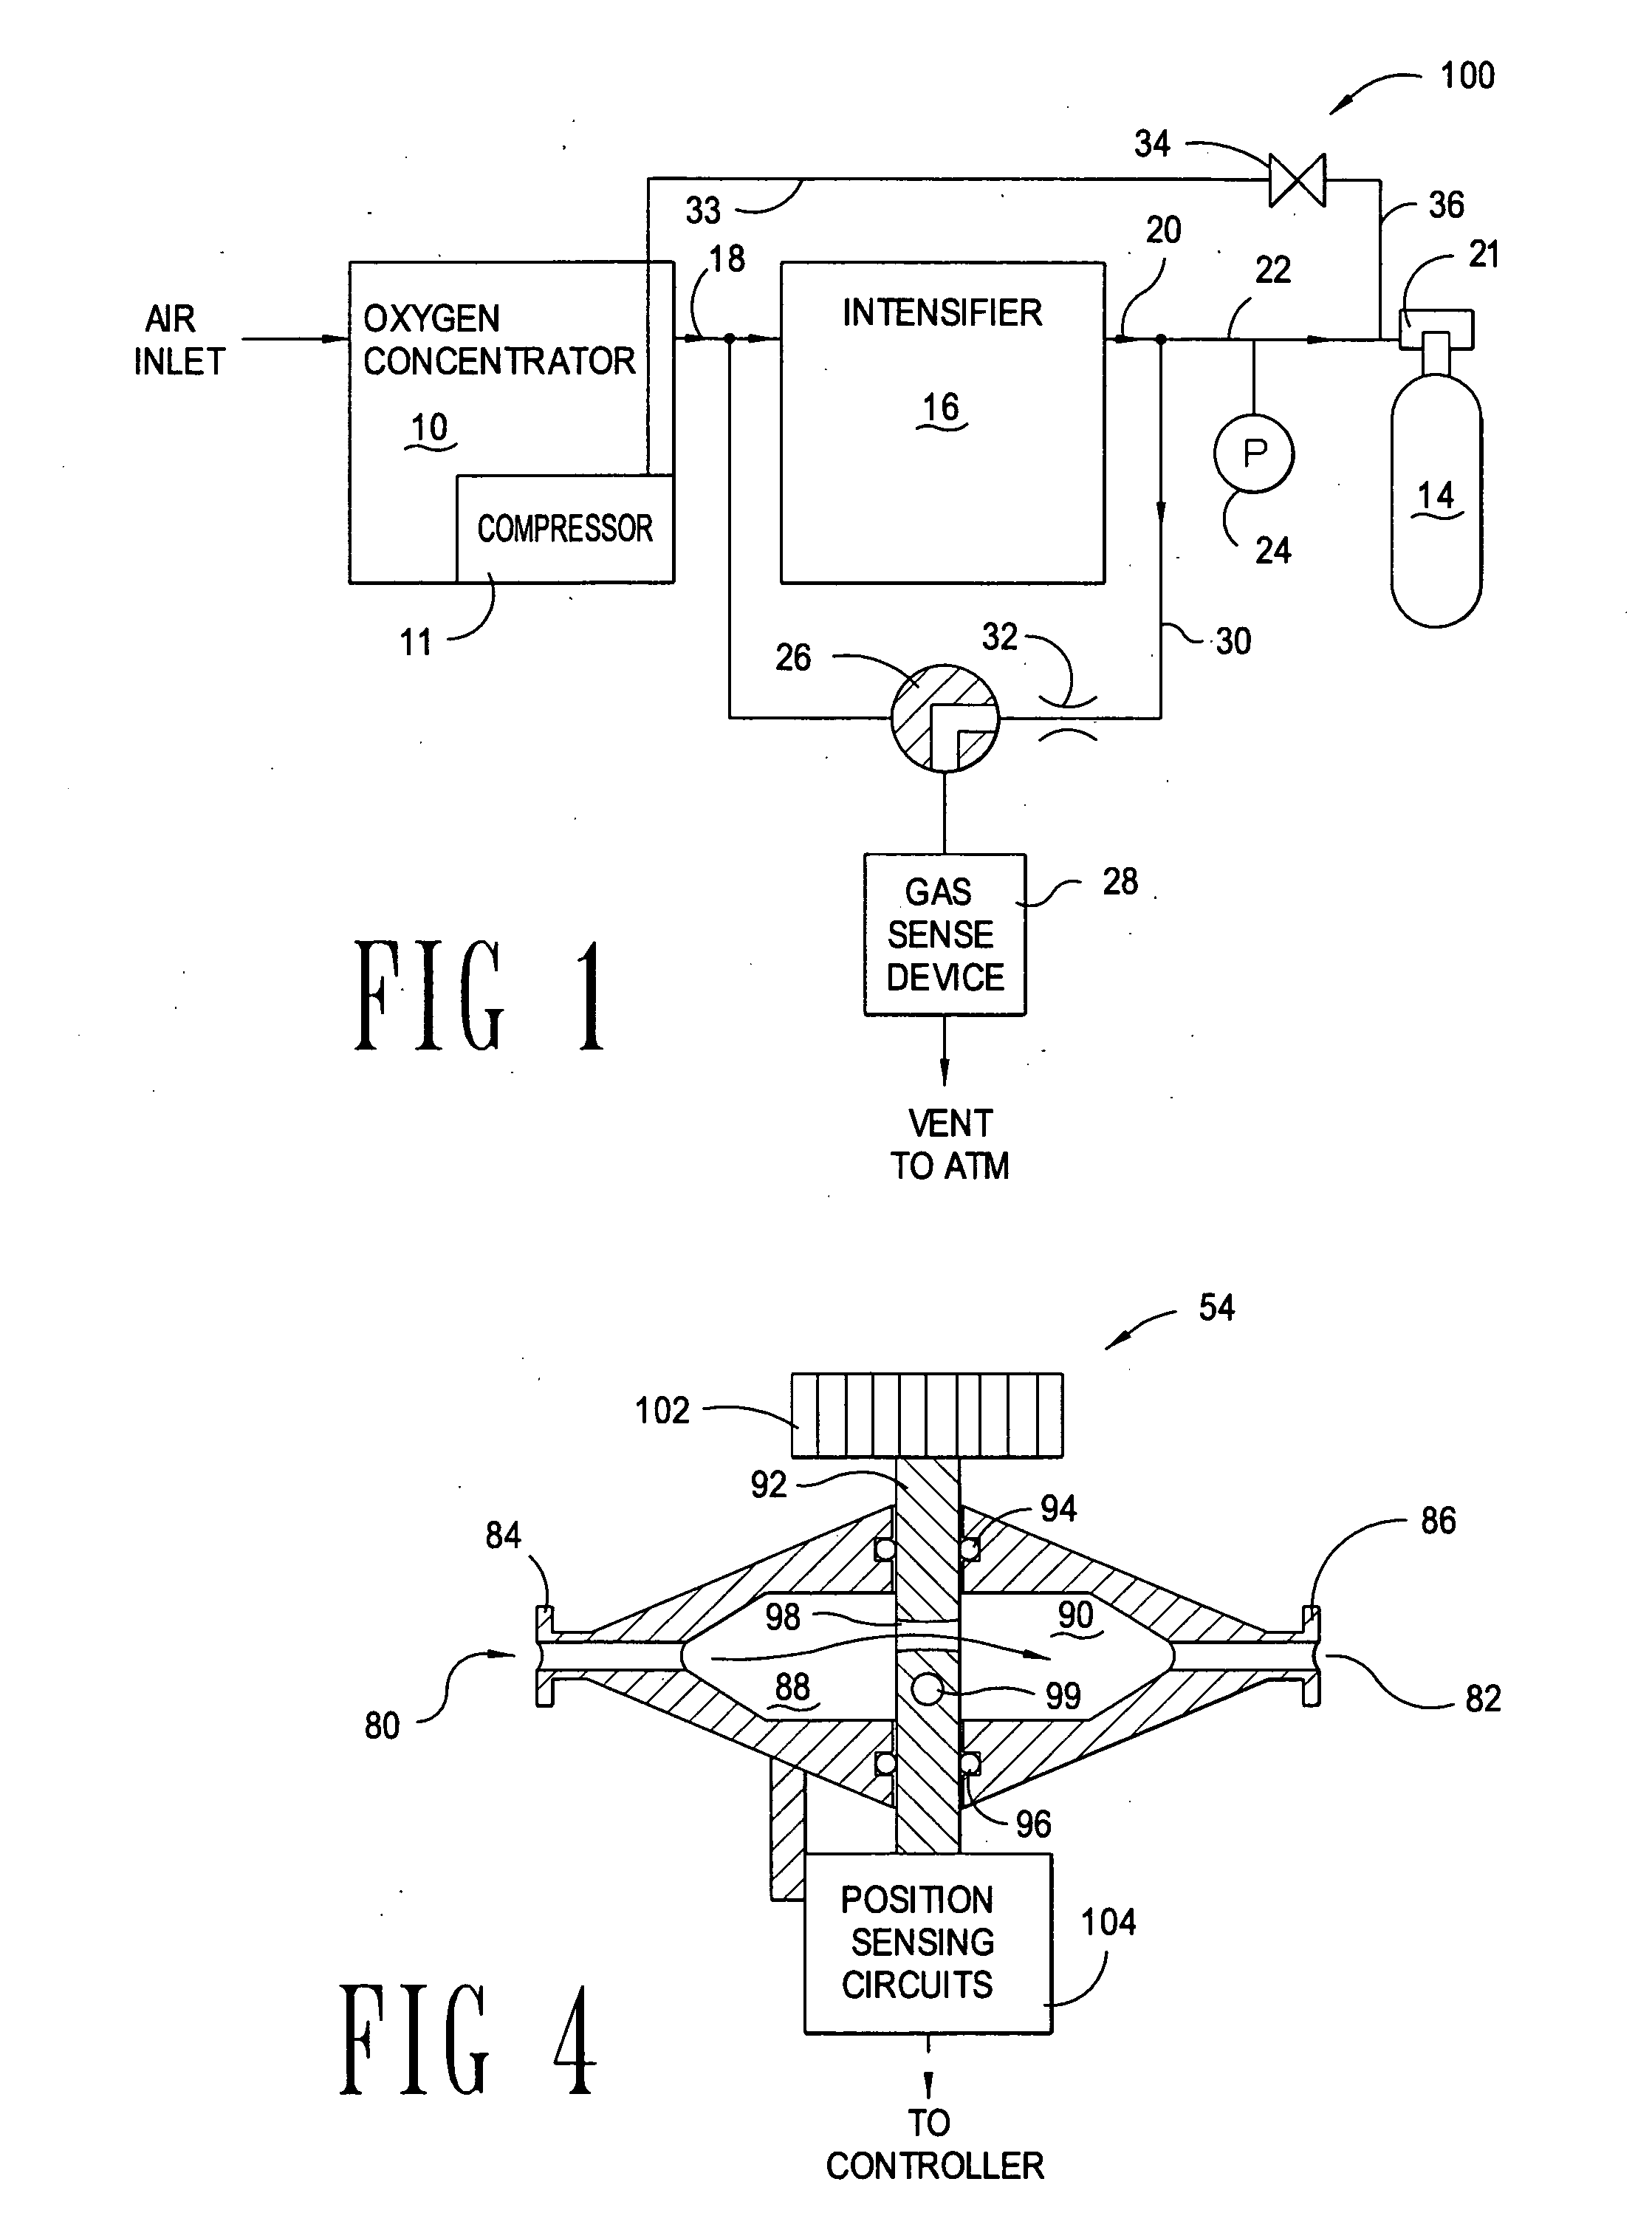 Method and system for delivery of therapeutic gas to a patient and for filling a cylinder